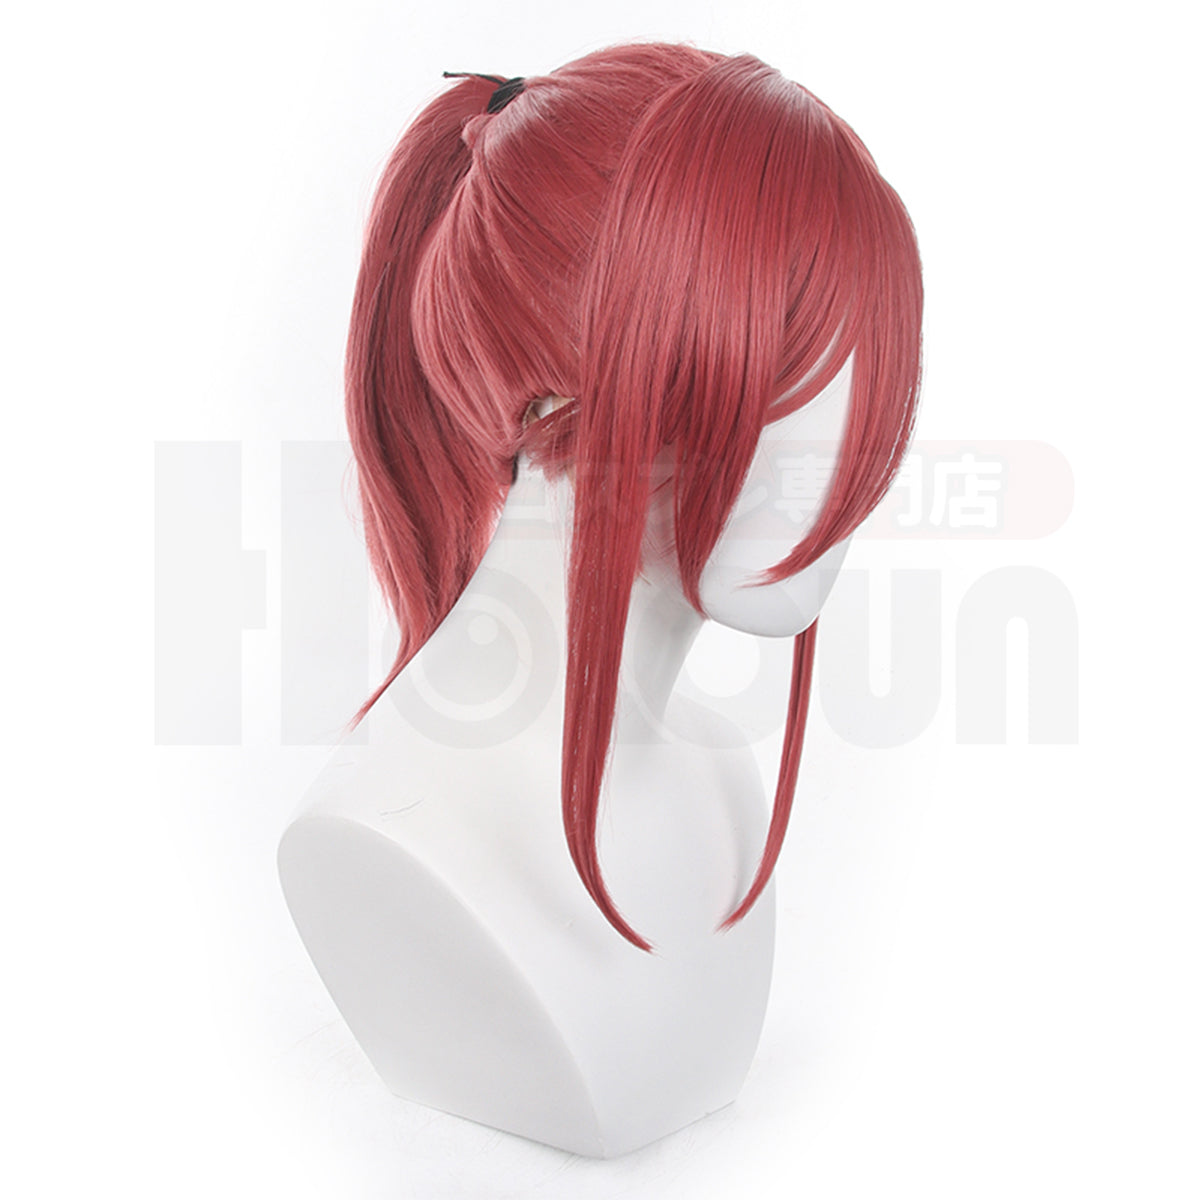 HOLOUN Blue Lock Anime Chigiri Cosplay Costume Wig Casual Daily Wearing Sweater Pants Outfit Bag Rose Net Synthetic Fiber Gift